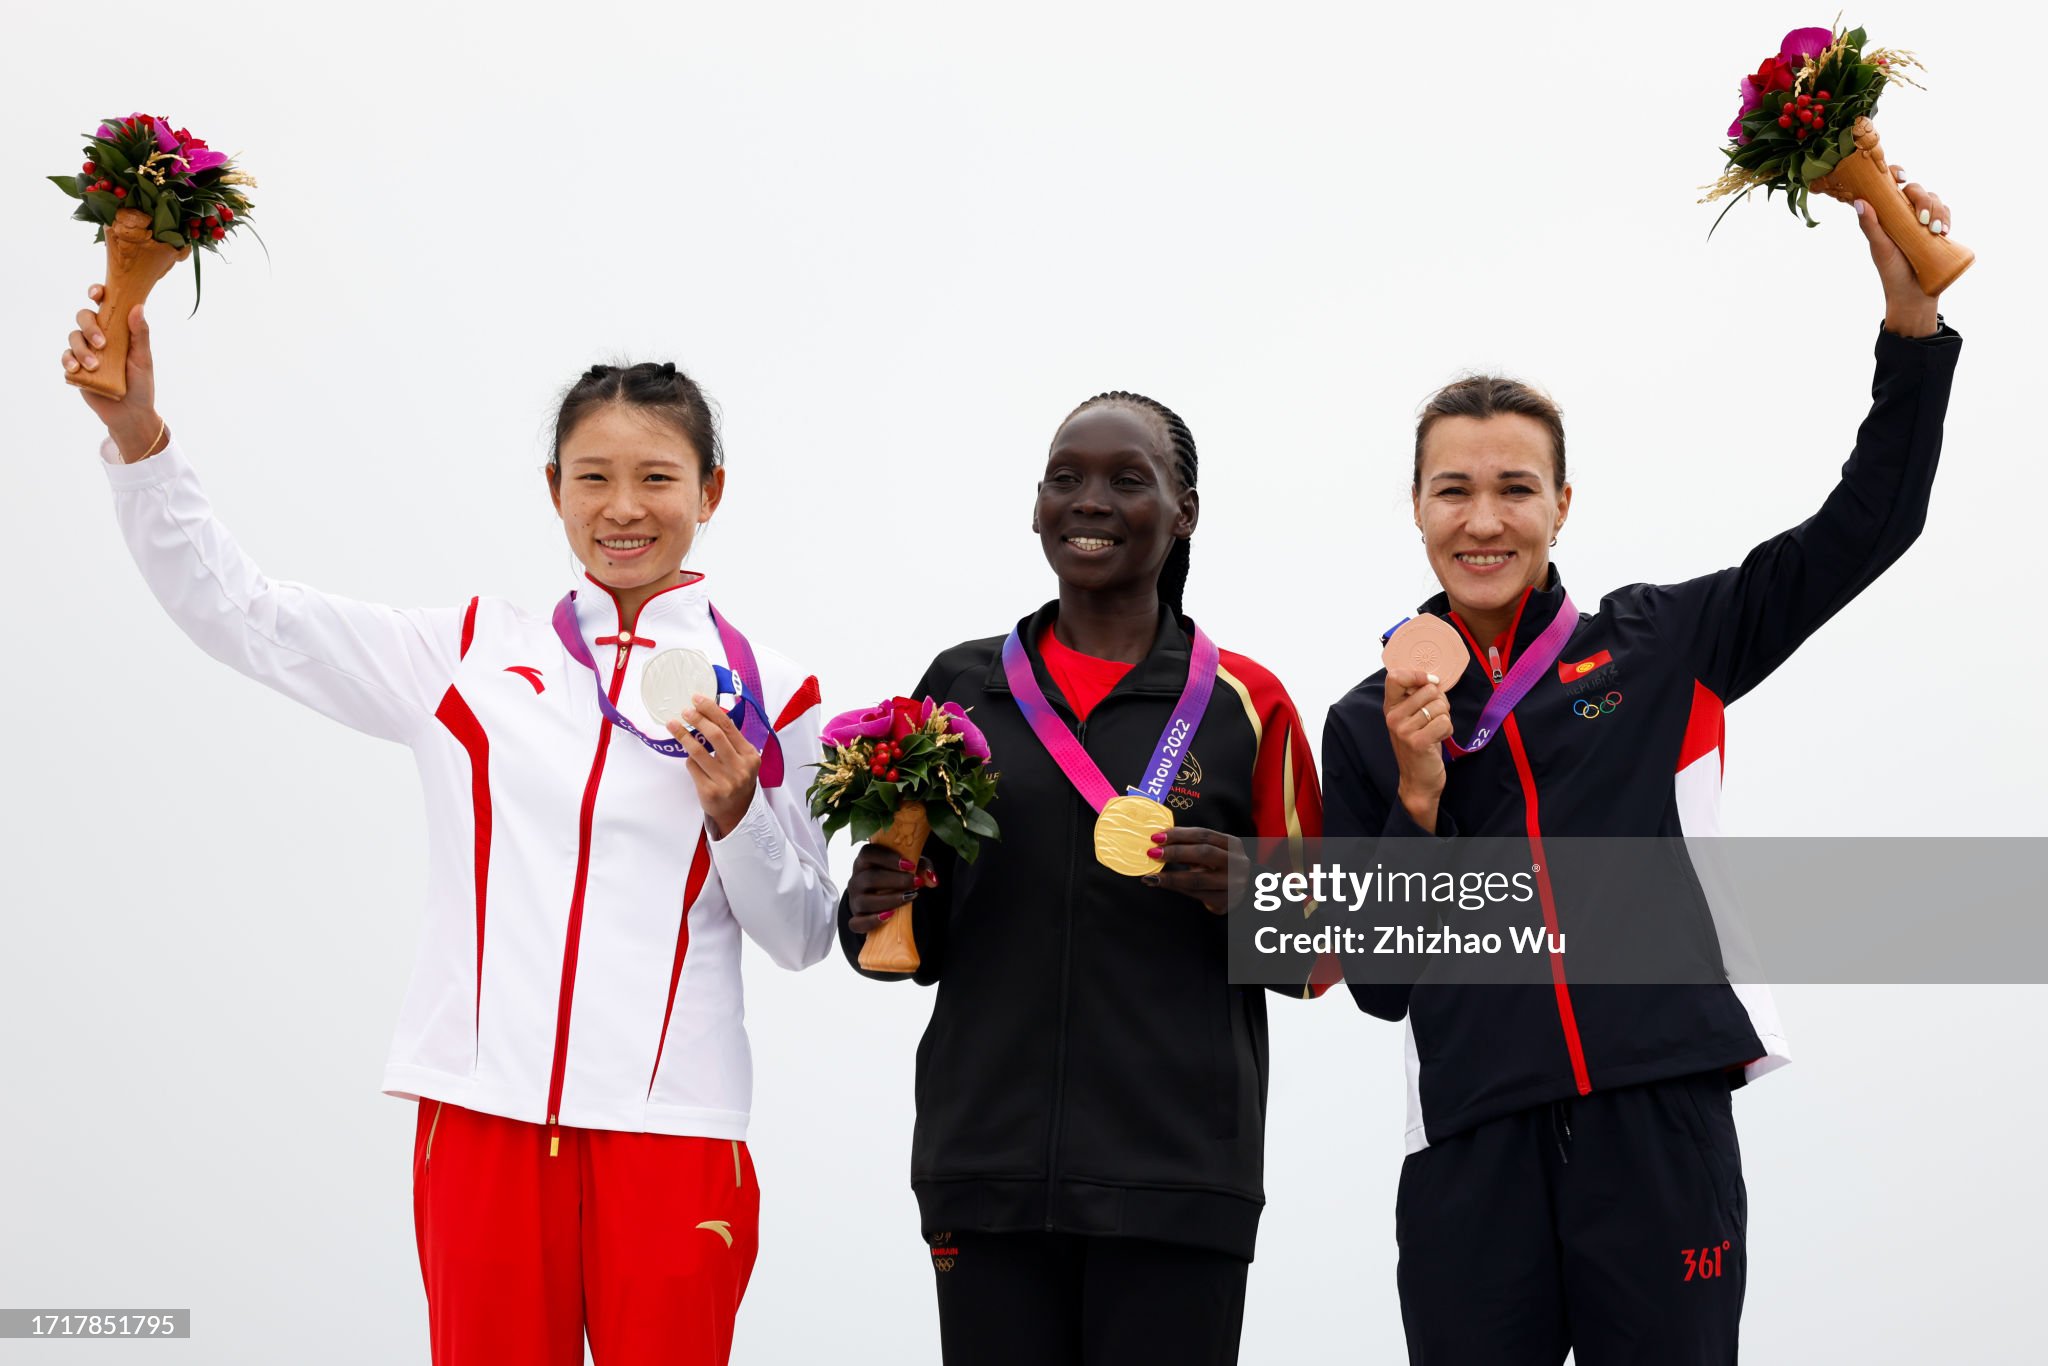 HANGZHOU, CHINA - OCTOBER 05: Gold medallist Eunice Chebichii Paul Chumba (C) of Bahrain, Silver medallist Zhang Deshun of China, Bronze medallist Sardana Trofimova of Kyrgyzstan attend the award ceremony after the 19th Asian Game Women's Marathon Final at Smart New World Qiantang River Green Belt on October 05, 2023 in Hangzhou, China. (Photo by Zhizhao Wu/Getty Images)